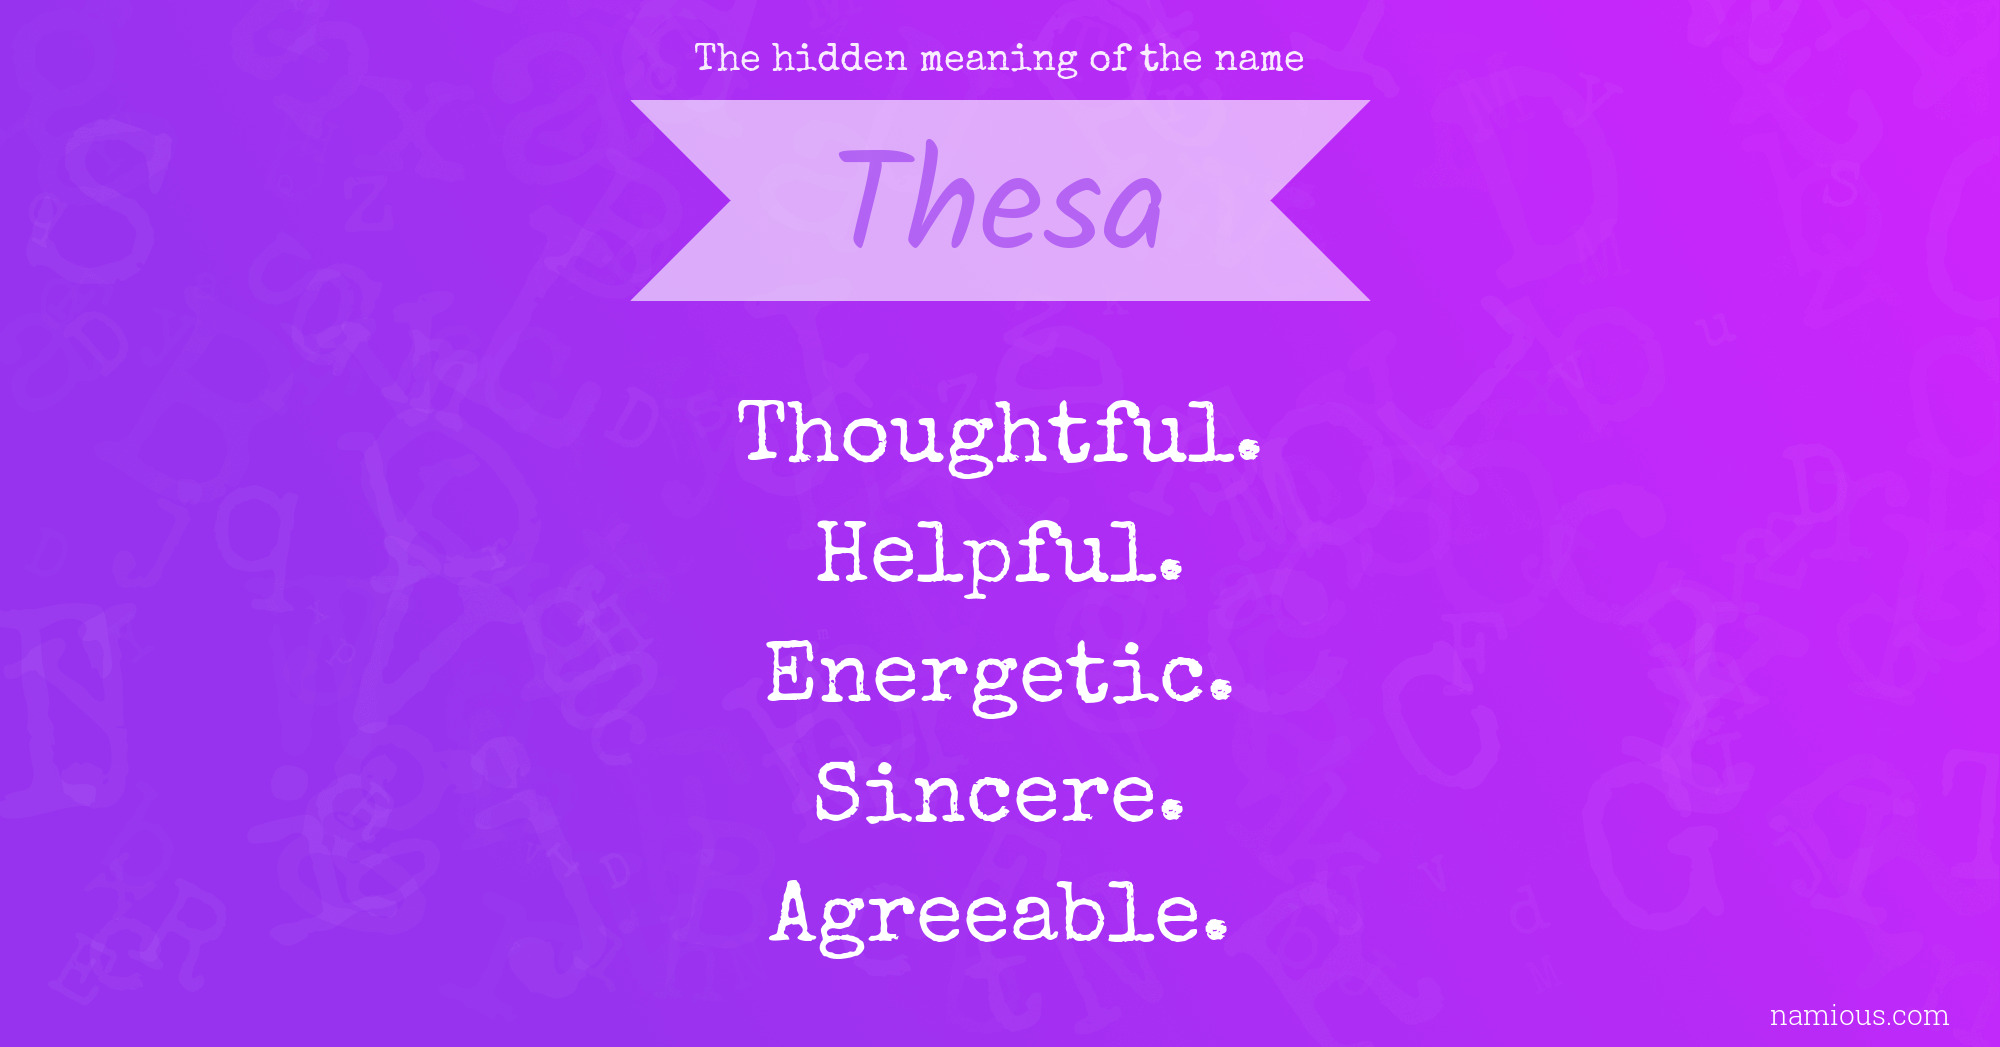 The hidden meaning of the name Thesa